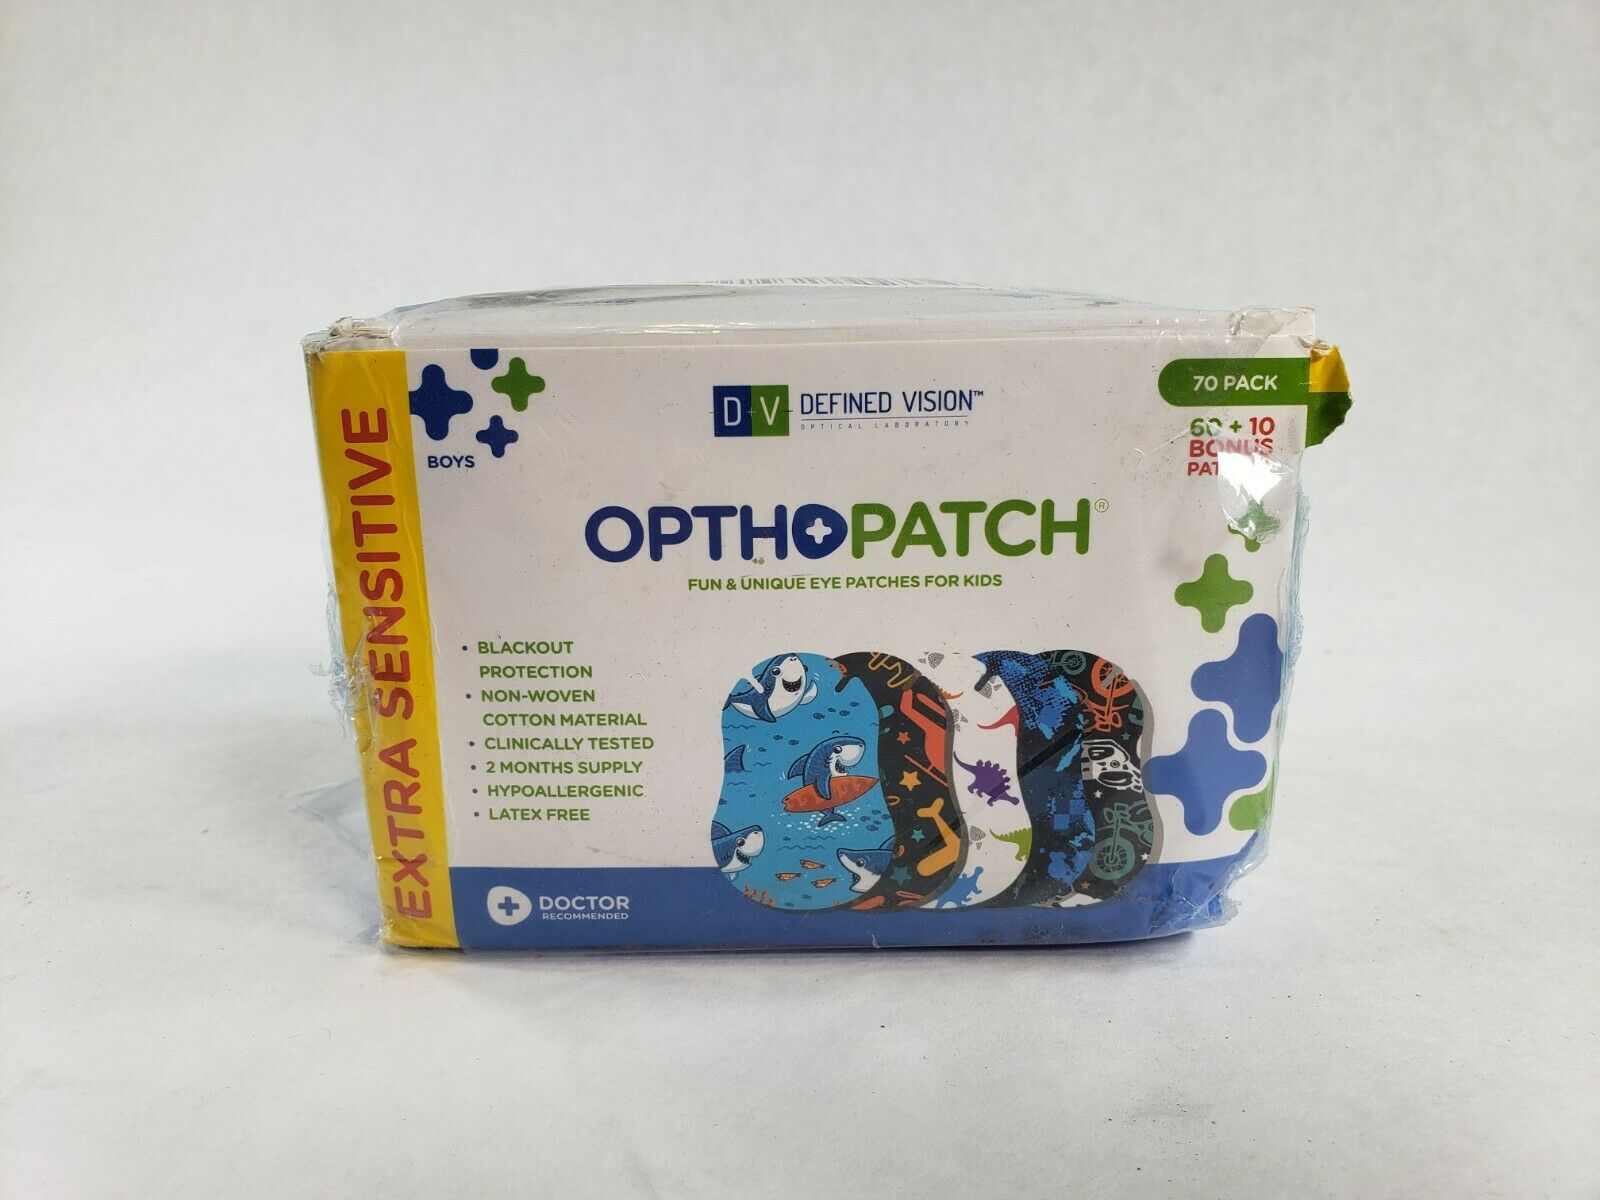 Defined Vision Boys Optho Patch Fun And Unique Eye Patches For Kids 70 Patches